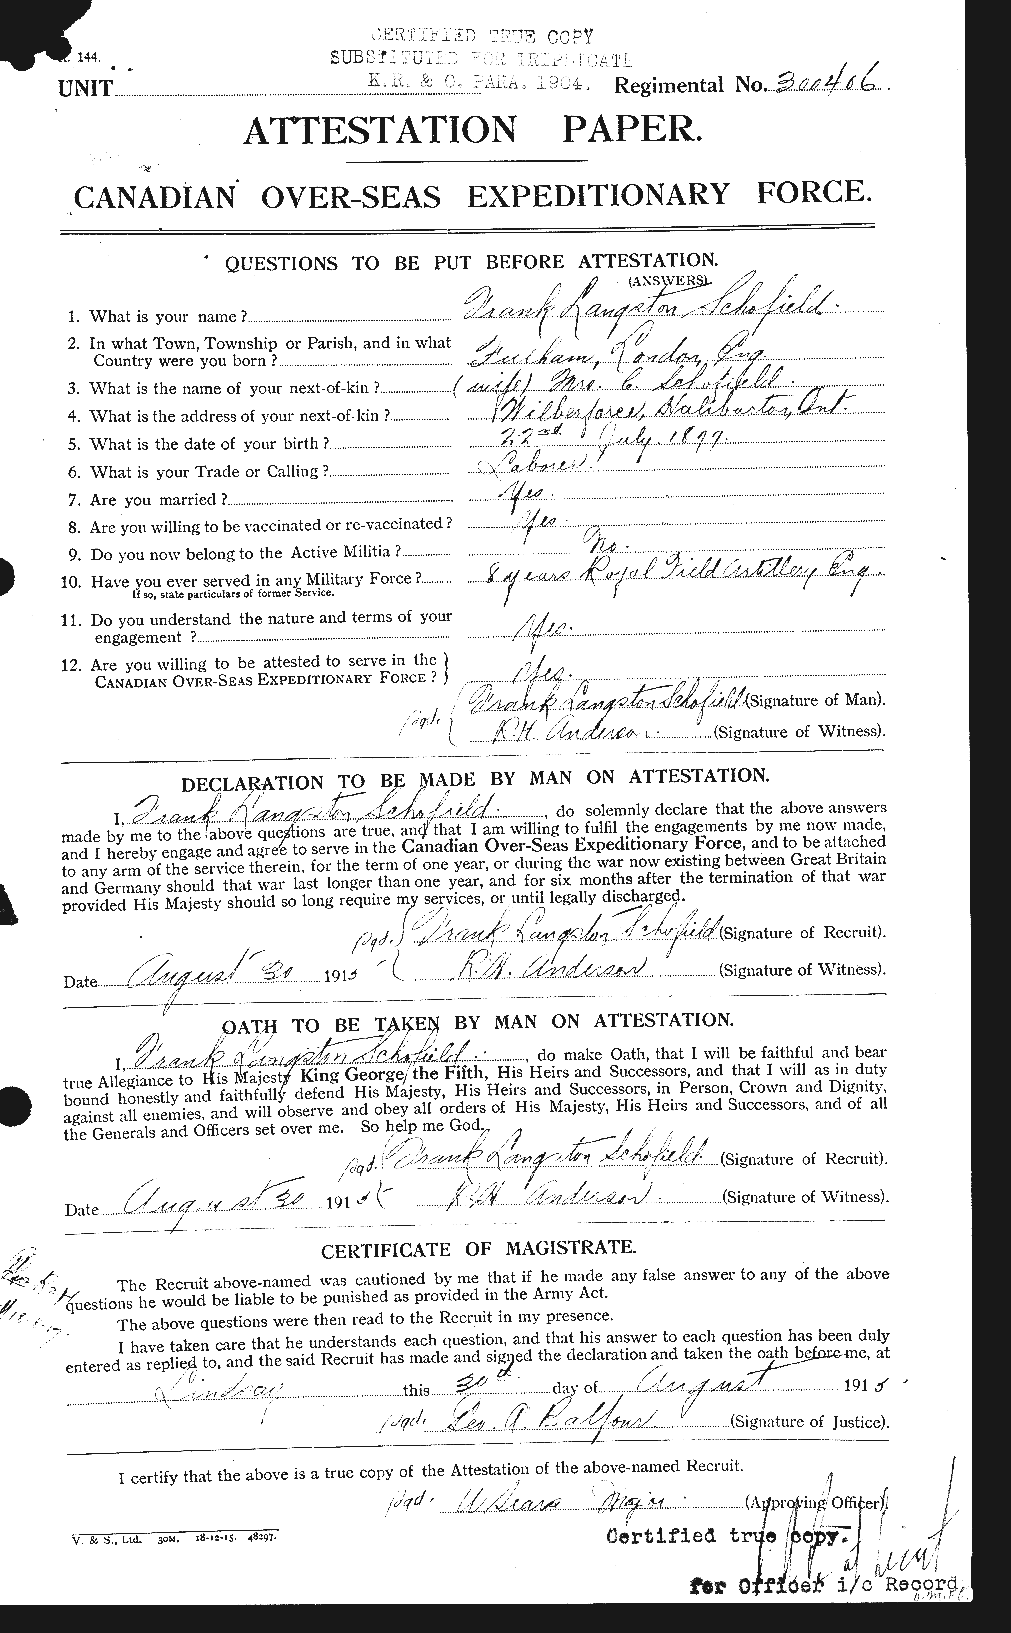 Personnel Records of the First World War - CEF 082203a